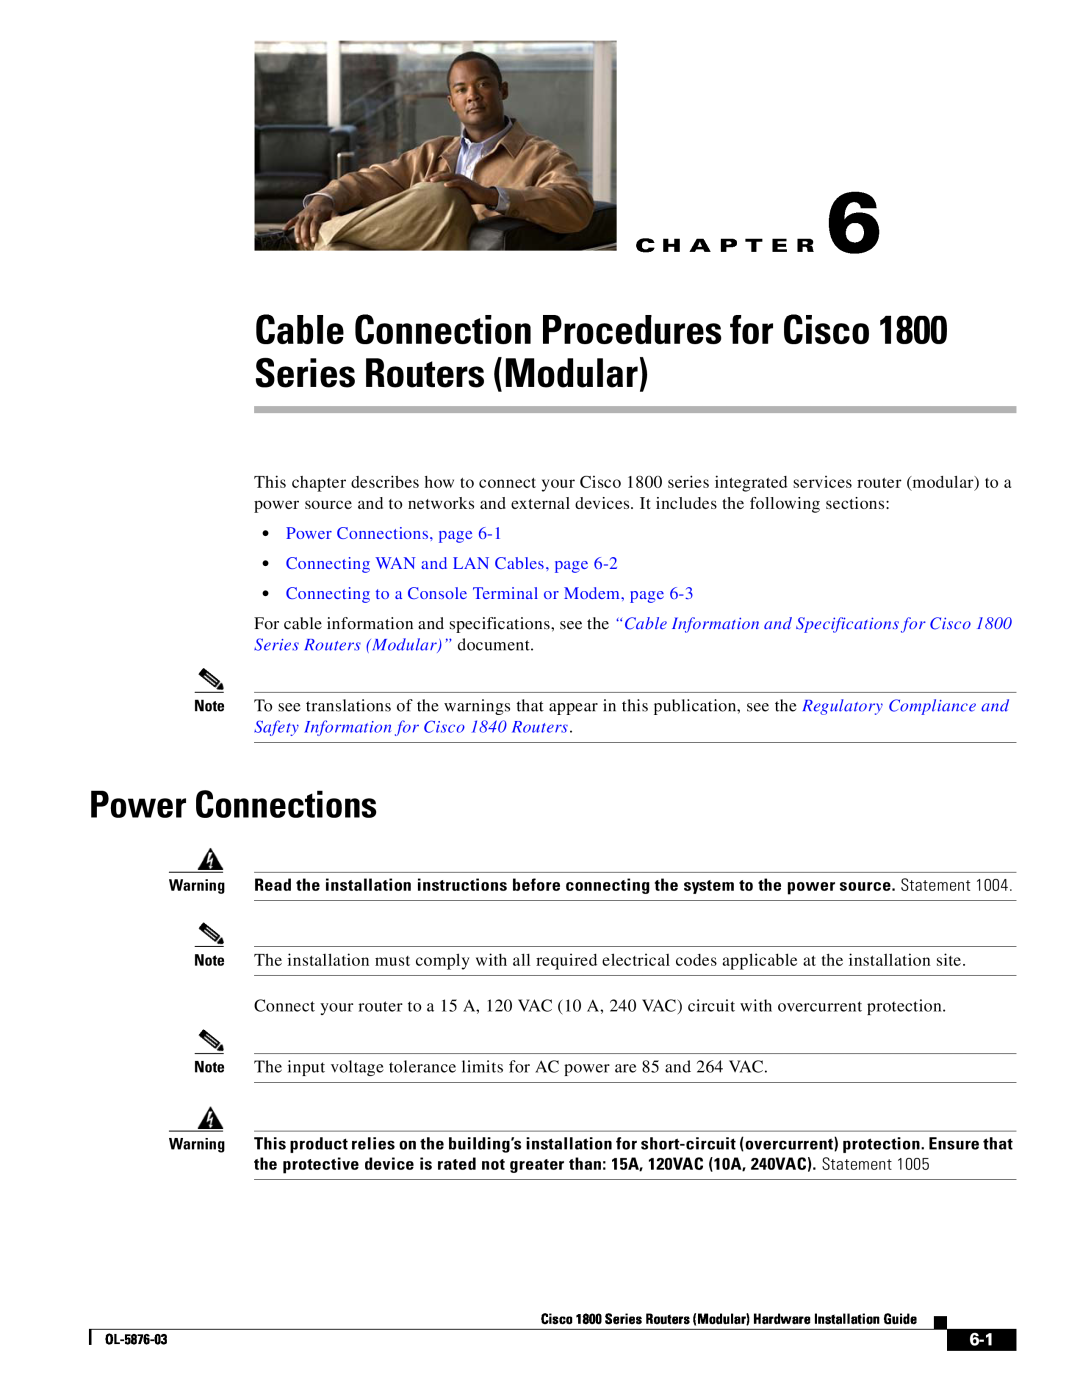 Cisco Systems CISCO1841-HSEC/K9-RF manual Series Routers Modular, Cable Connection Procedures for Cisco, Power Connections 